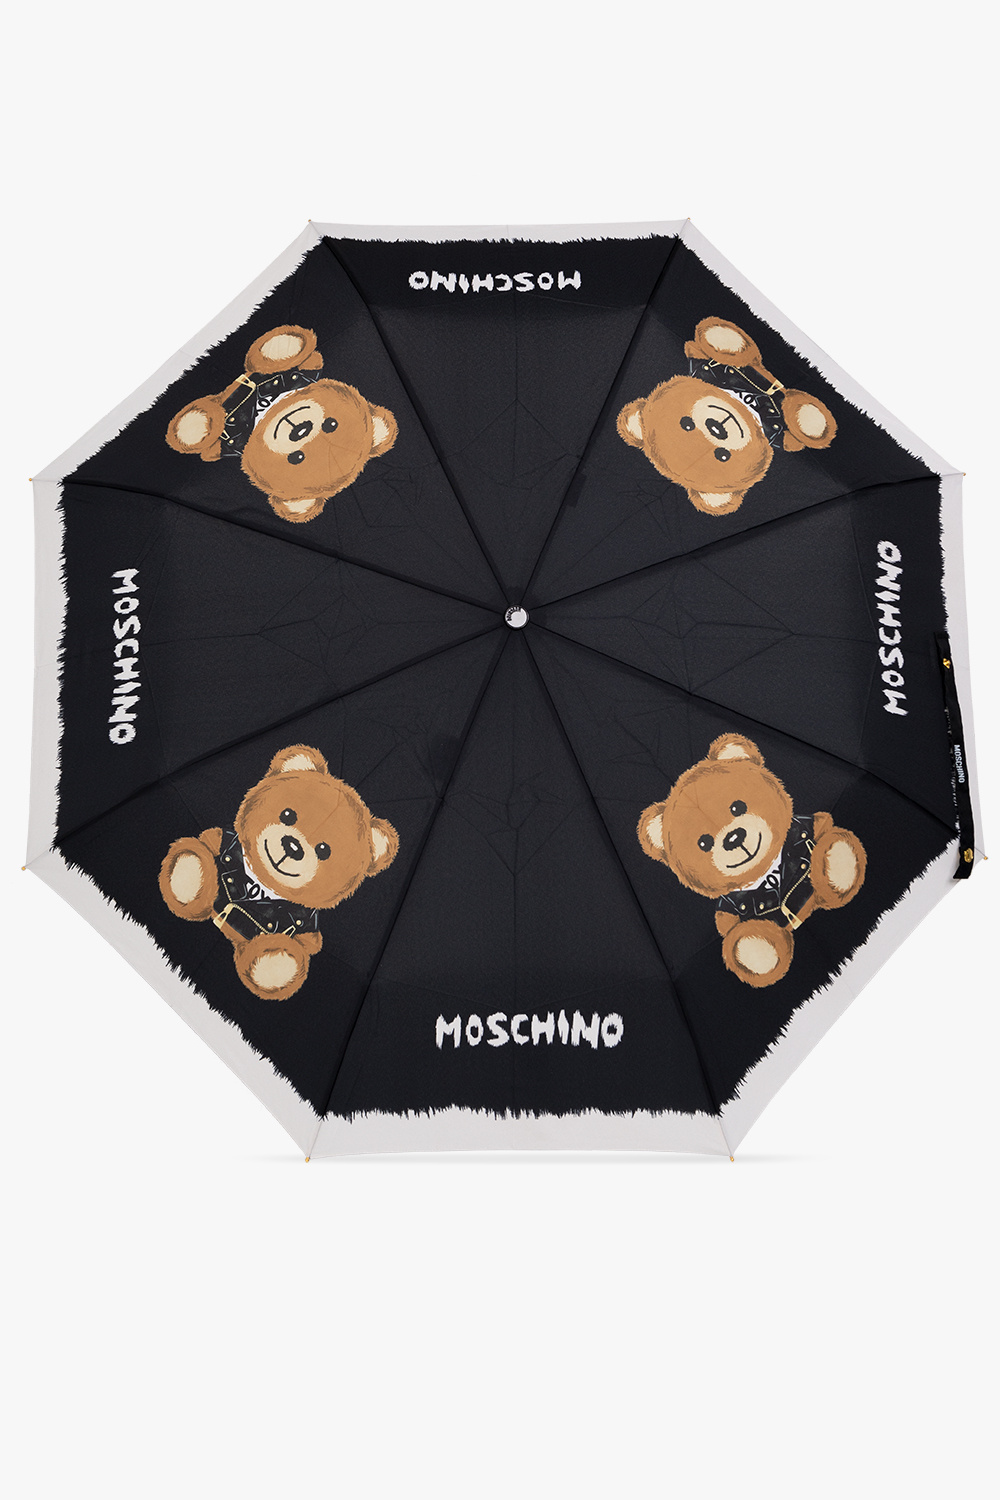 Moschino See what well be wearing